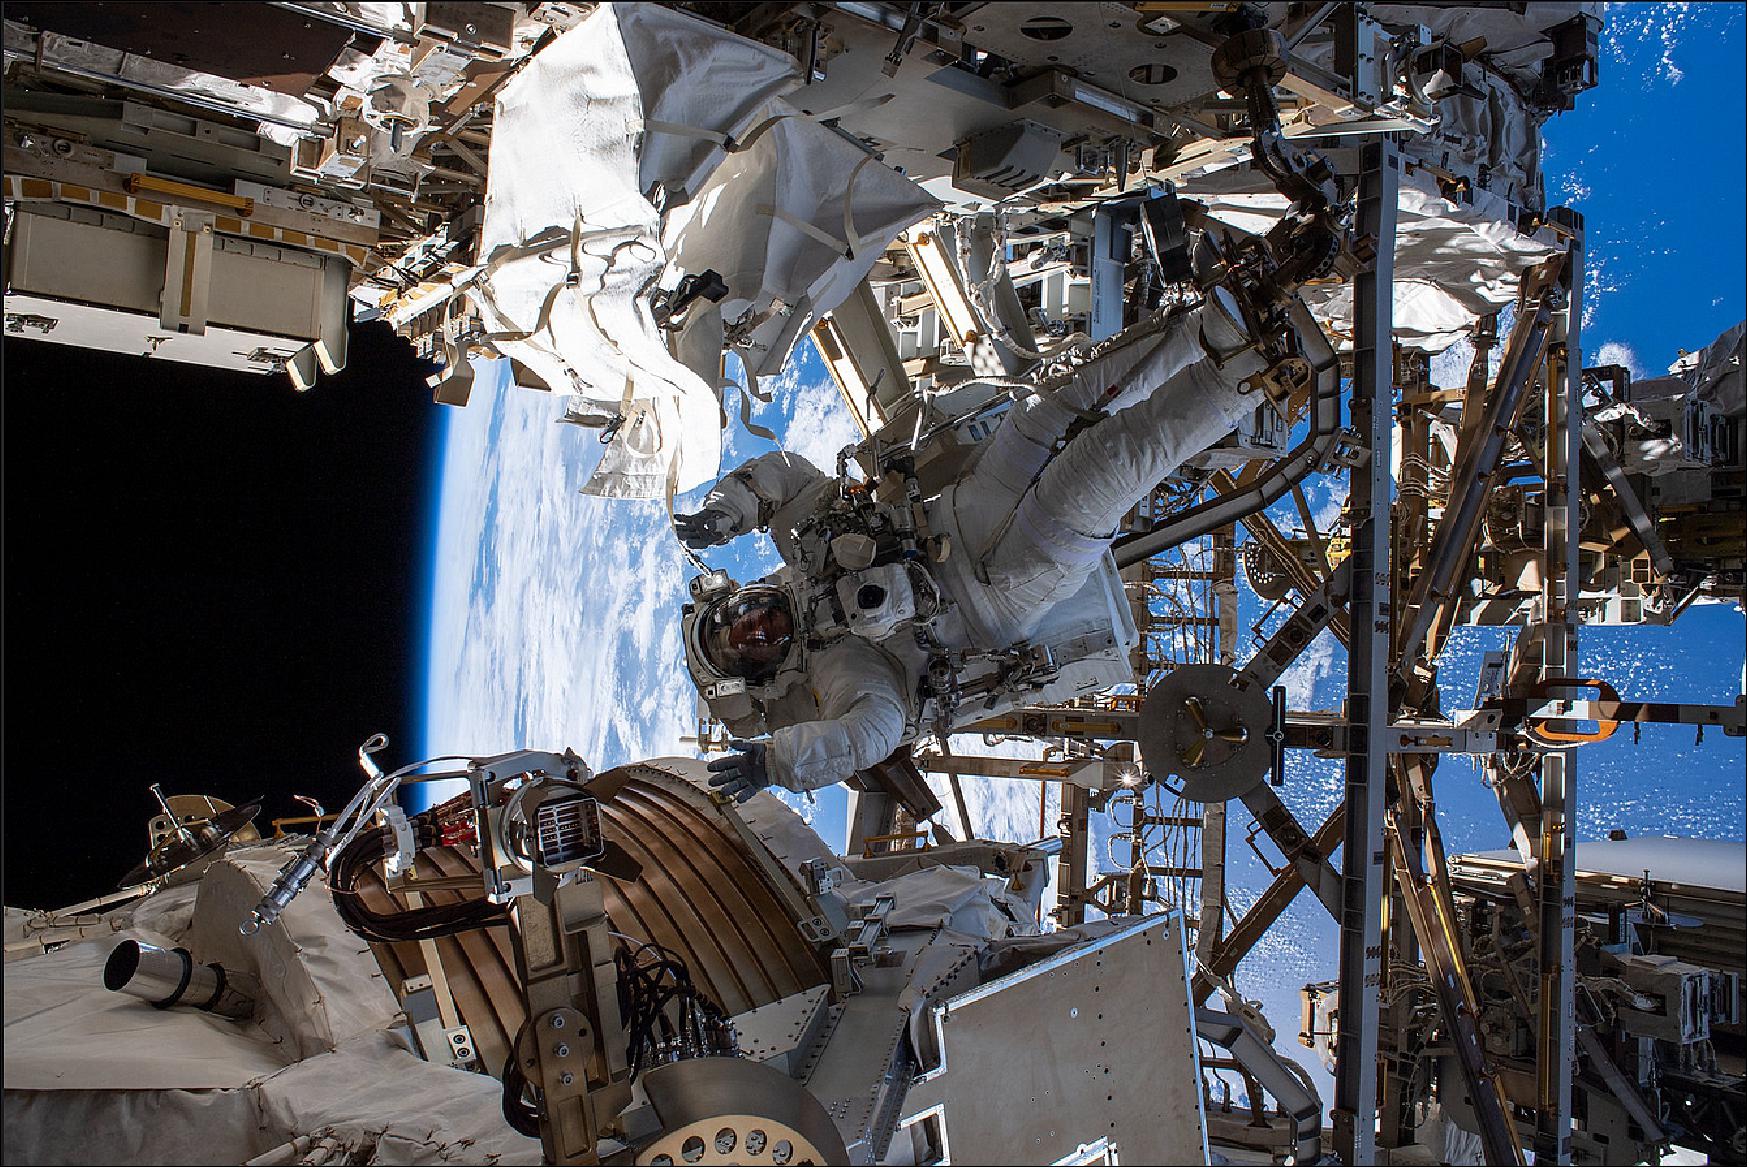 Figure 21: NASA astronaut Andrew Morgan waves as he is photographed (Nov. 15, 2019) seemingly camouflaged among the Alpha Magnetic Spectrometer (lower left) and other International Space Station hardware during the first spacewalk to repair the cosmic particle detector (image credit: NASA) 16)